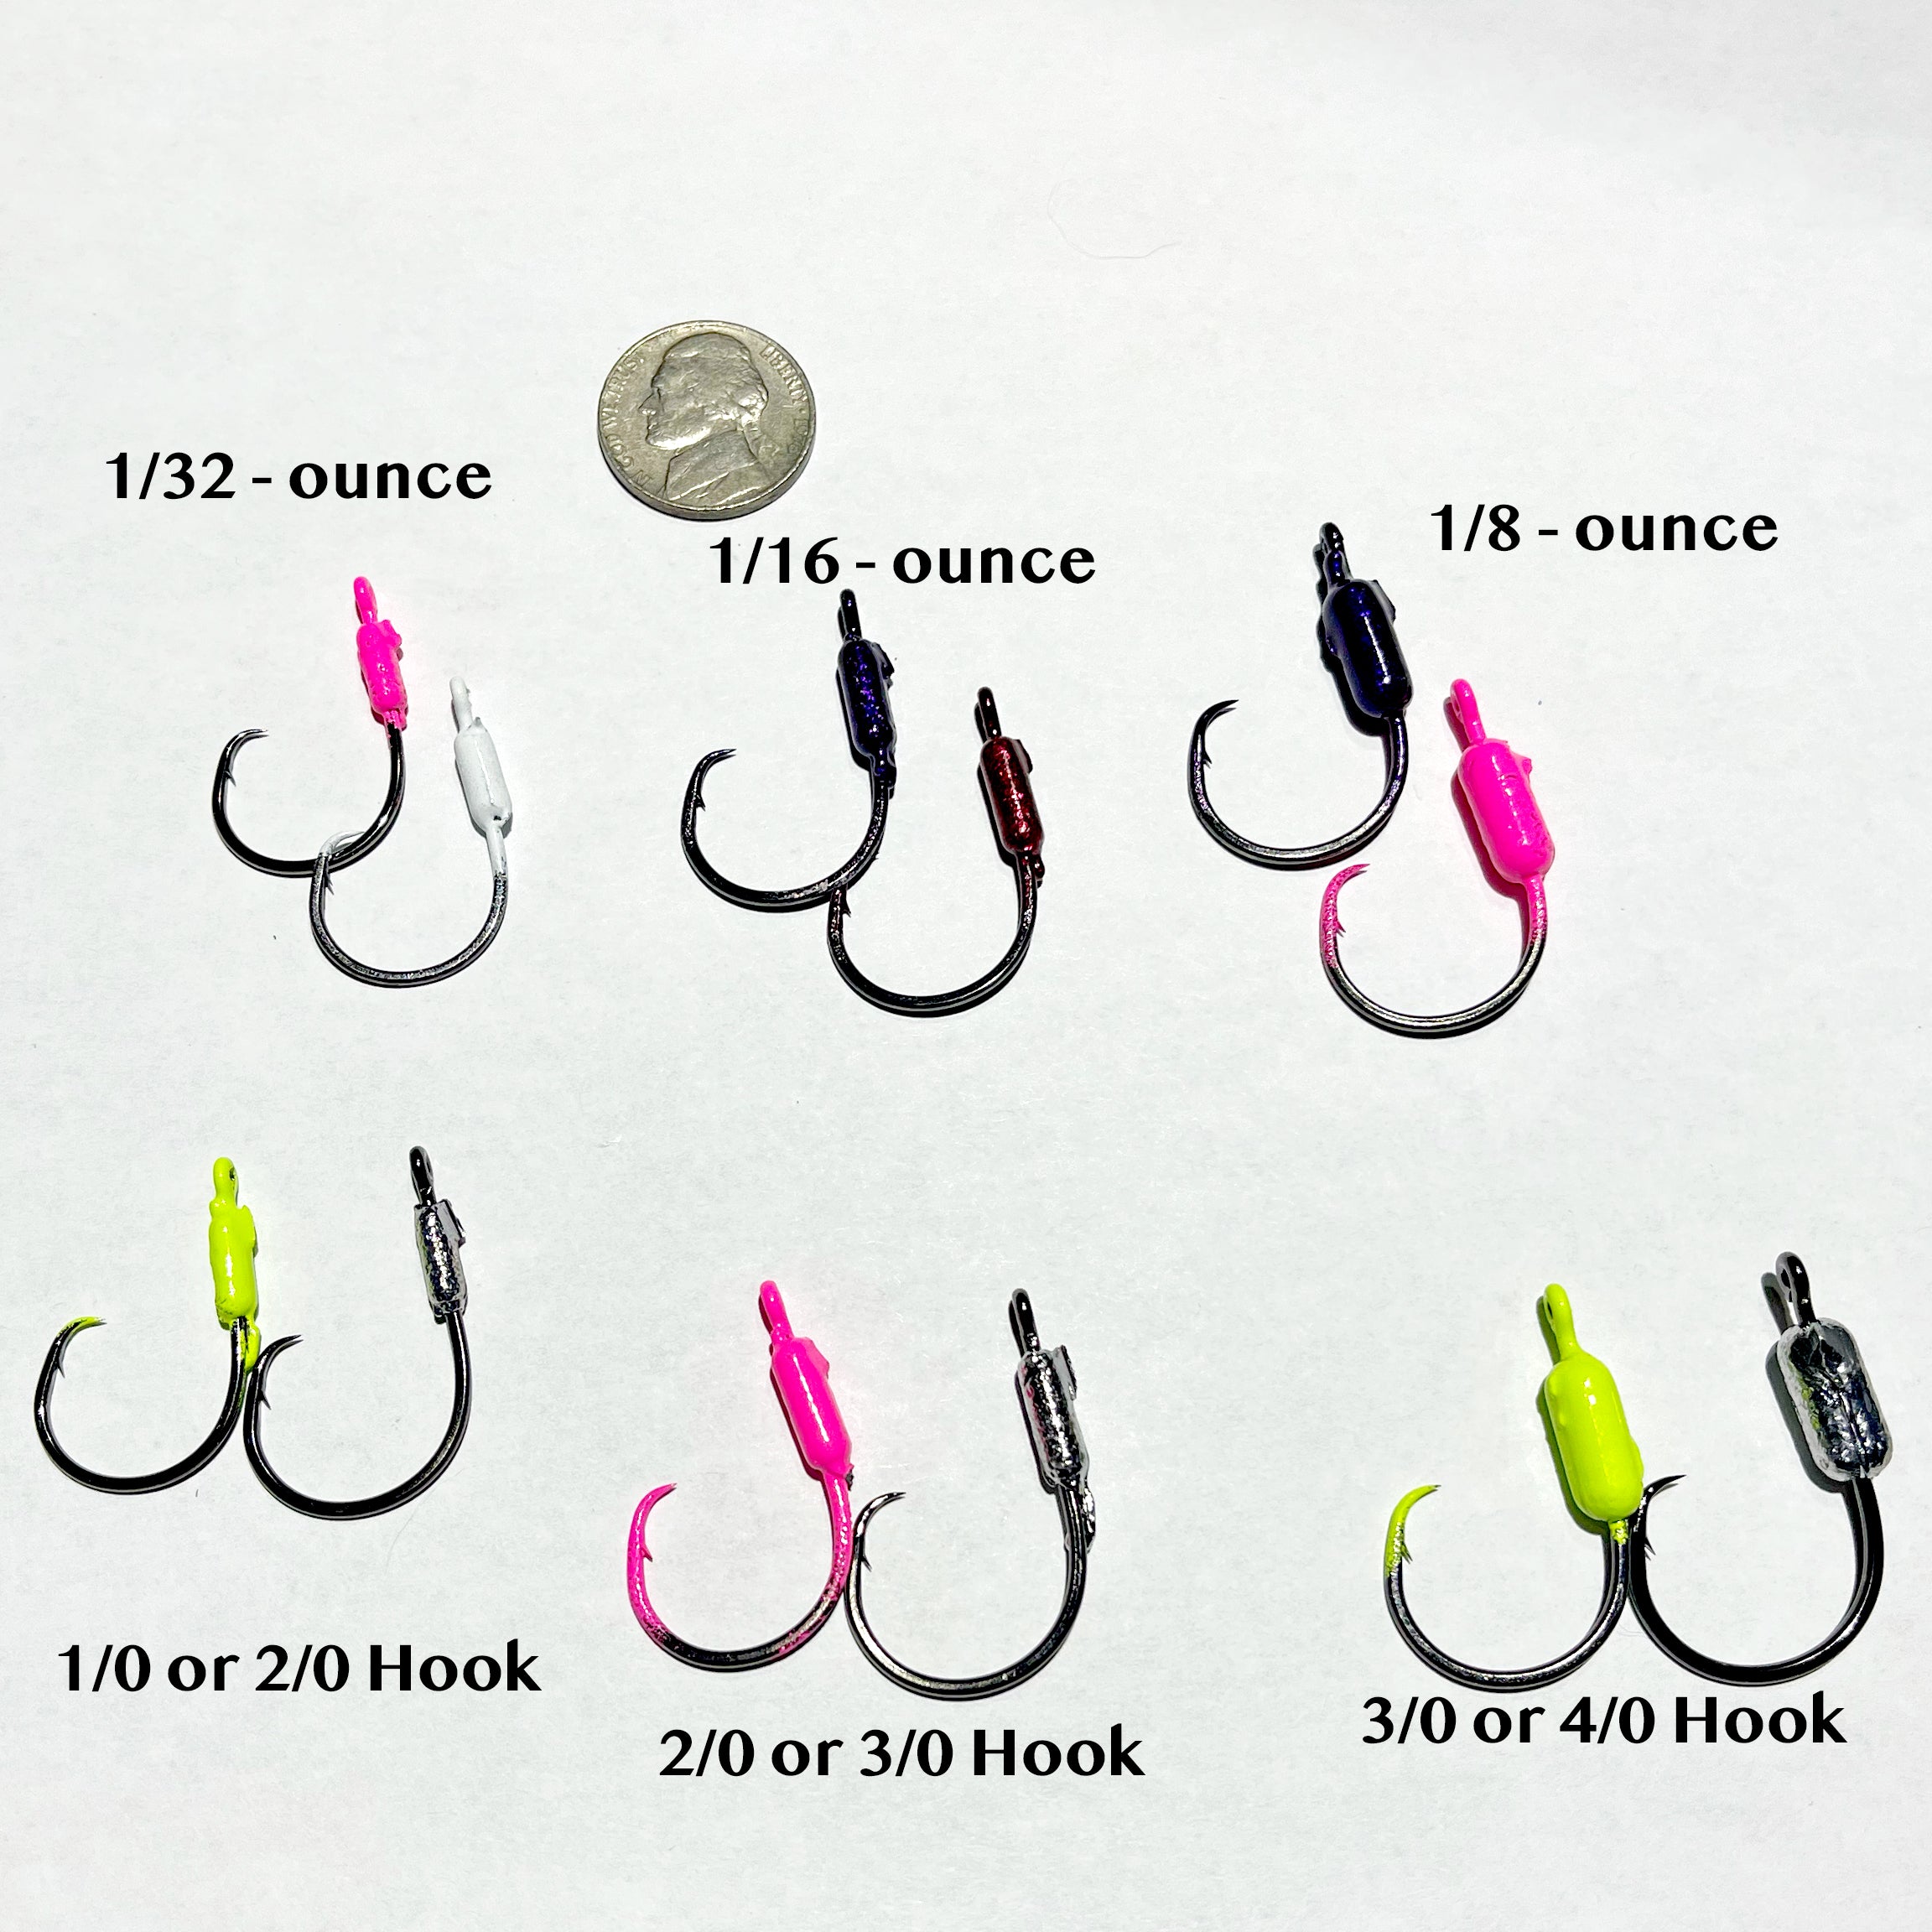 Yellowtail Snapper Weighted Circle Hook Jig - 4/0 Hook - 1/32 oz - 25 Pack